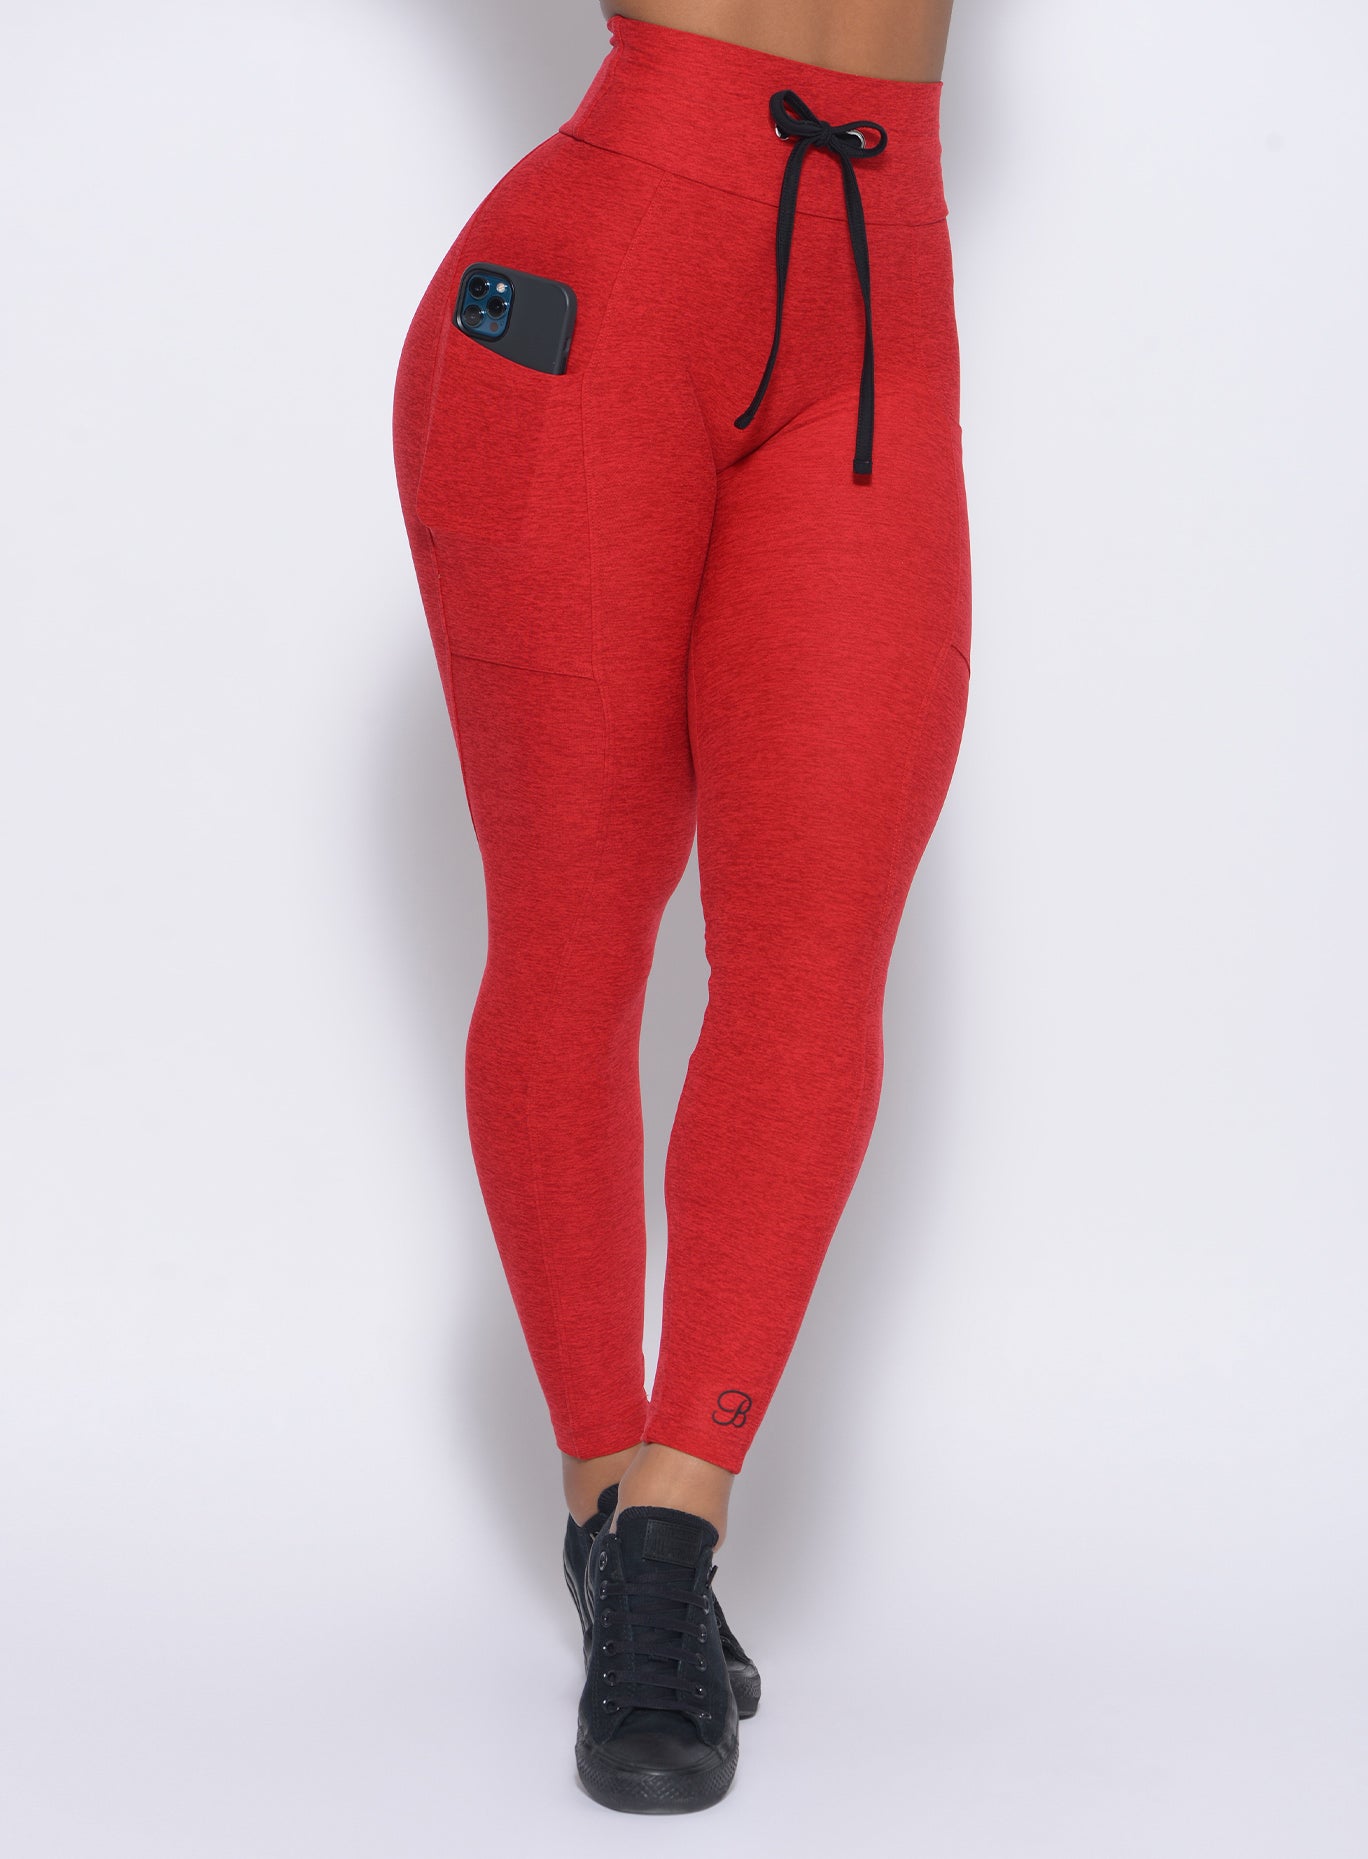 Front view of our thrive leggings in sunset red color 